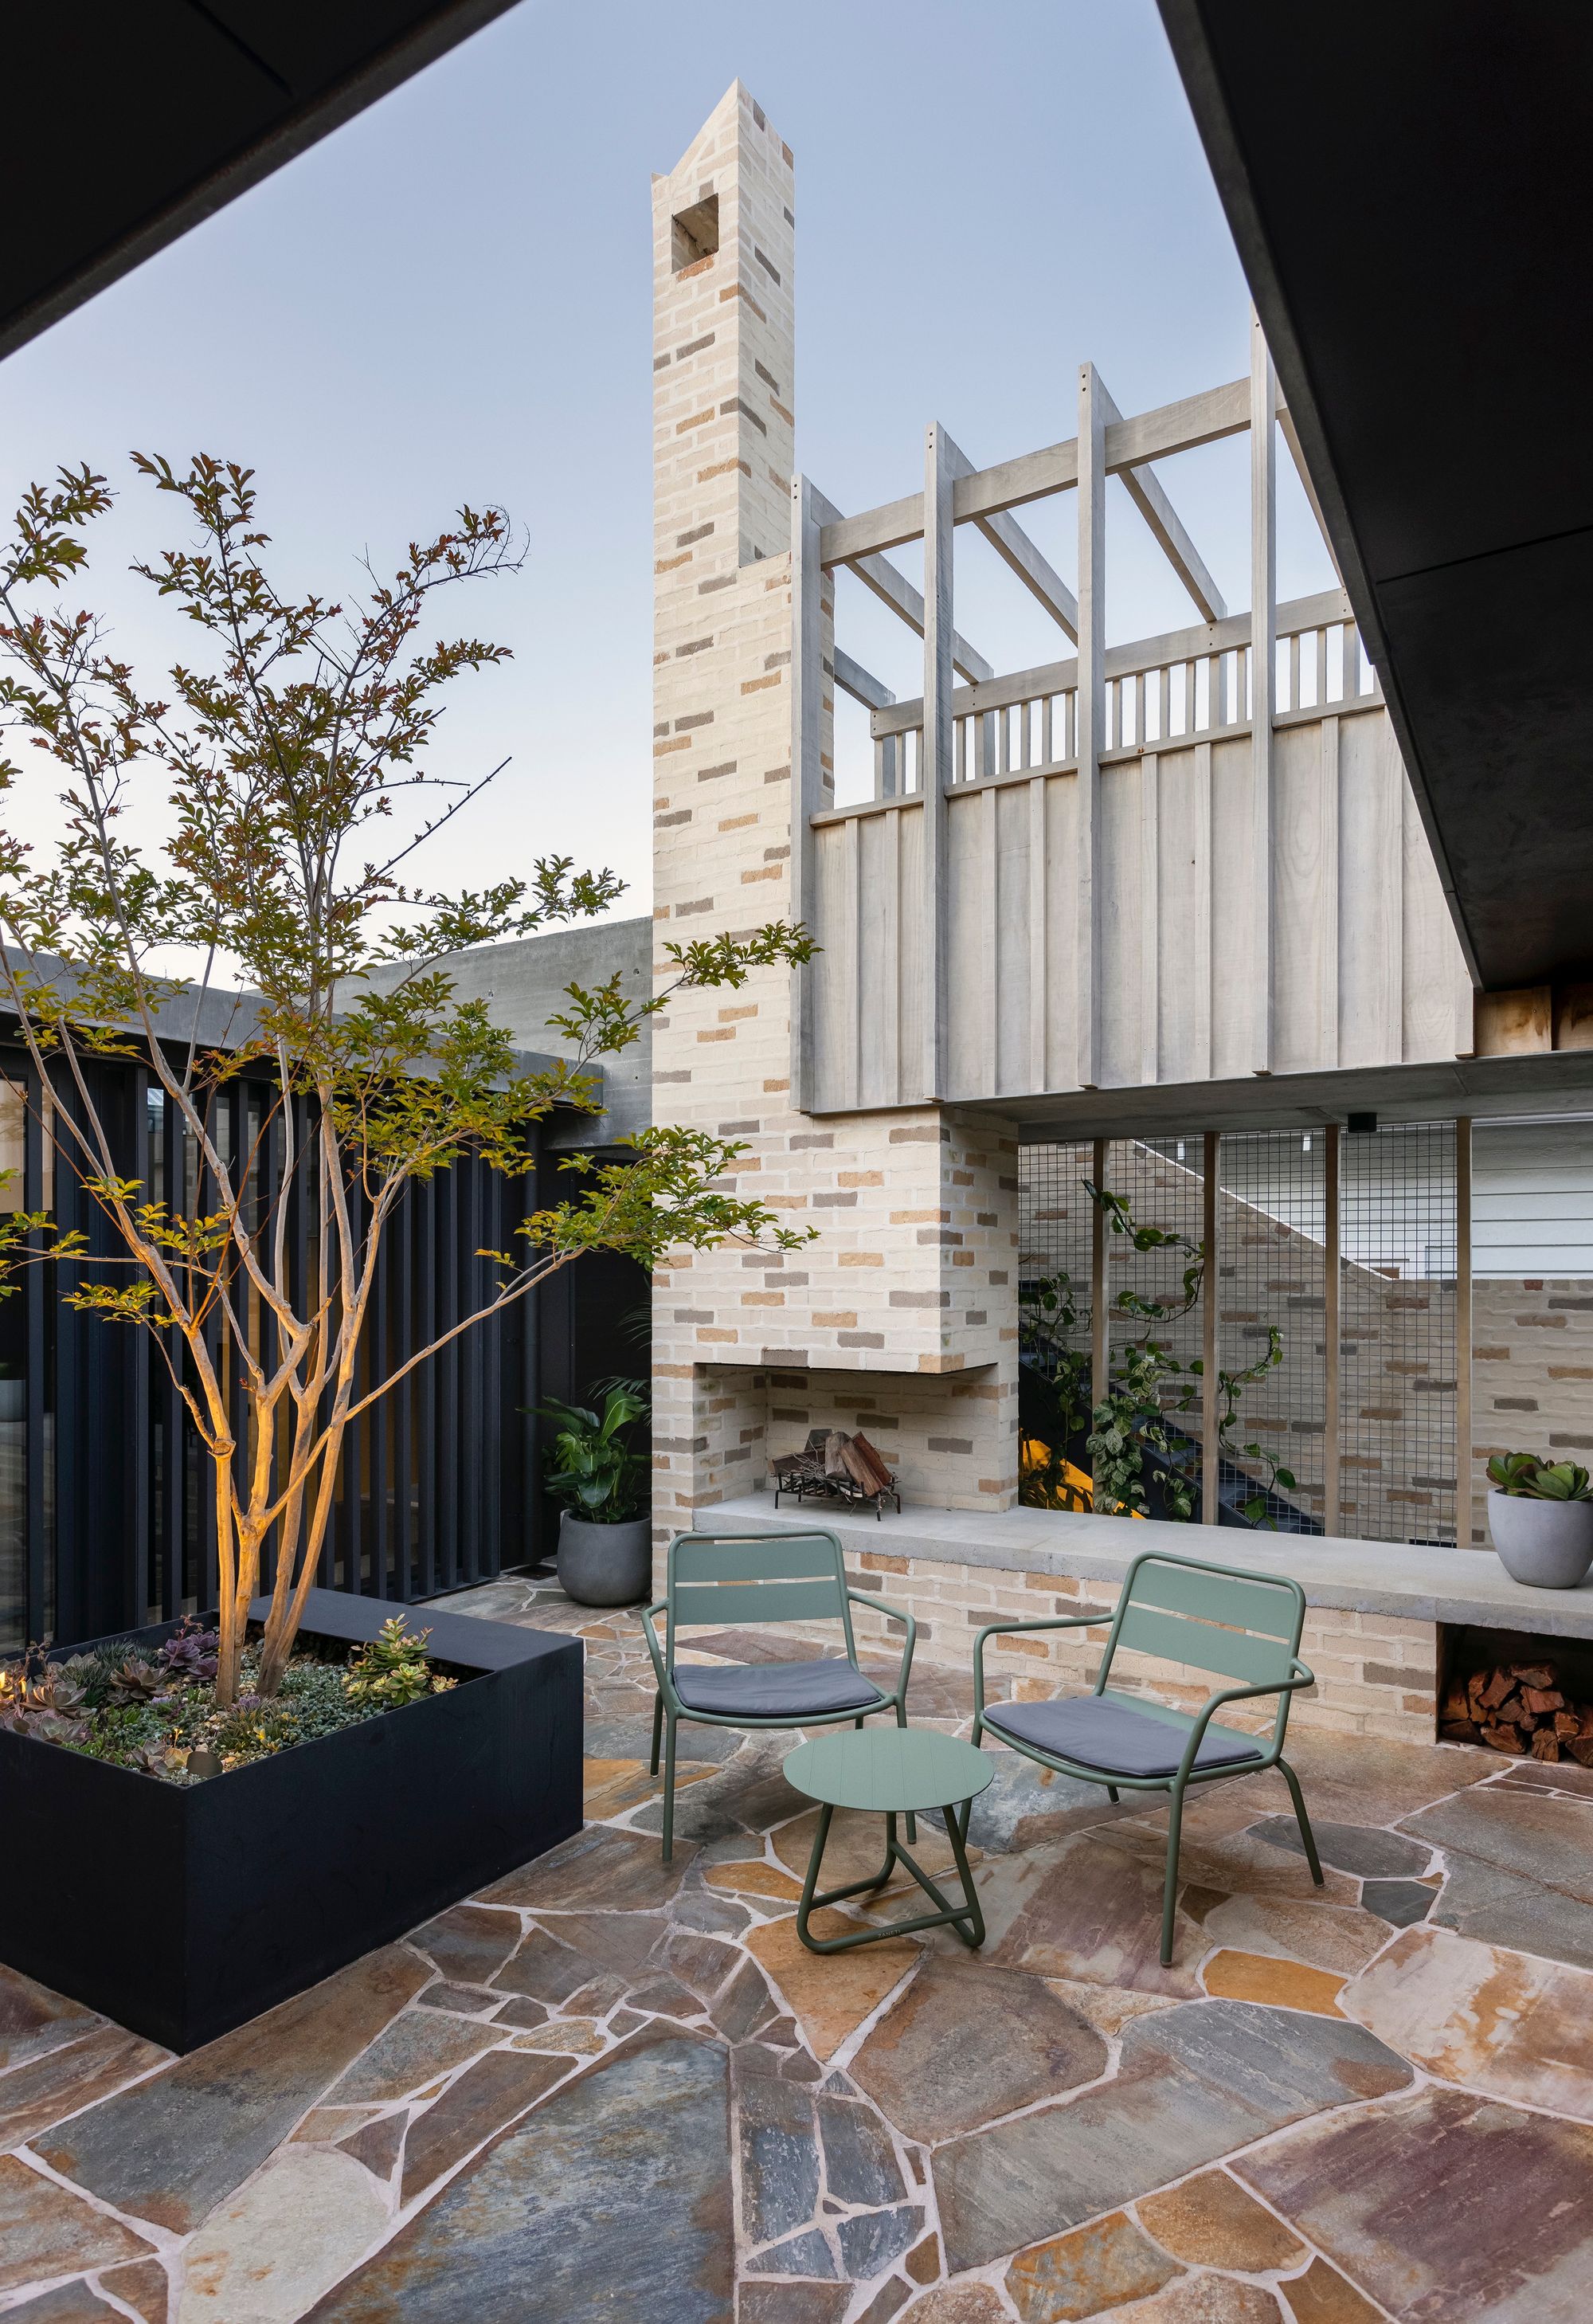 Higham Road by Philip Stejskal Architecture showing internal paved courtyard with large brick outdoor fireplace and seating